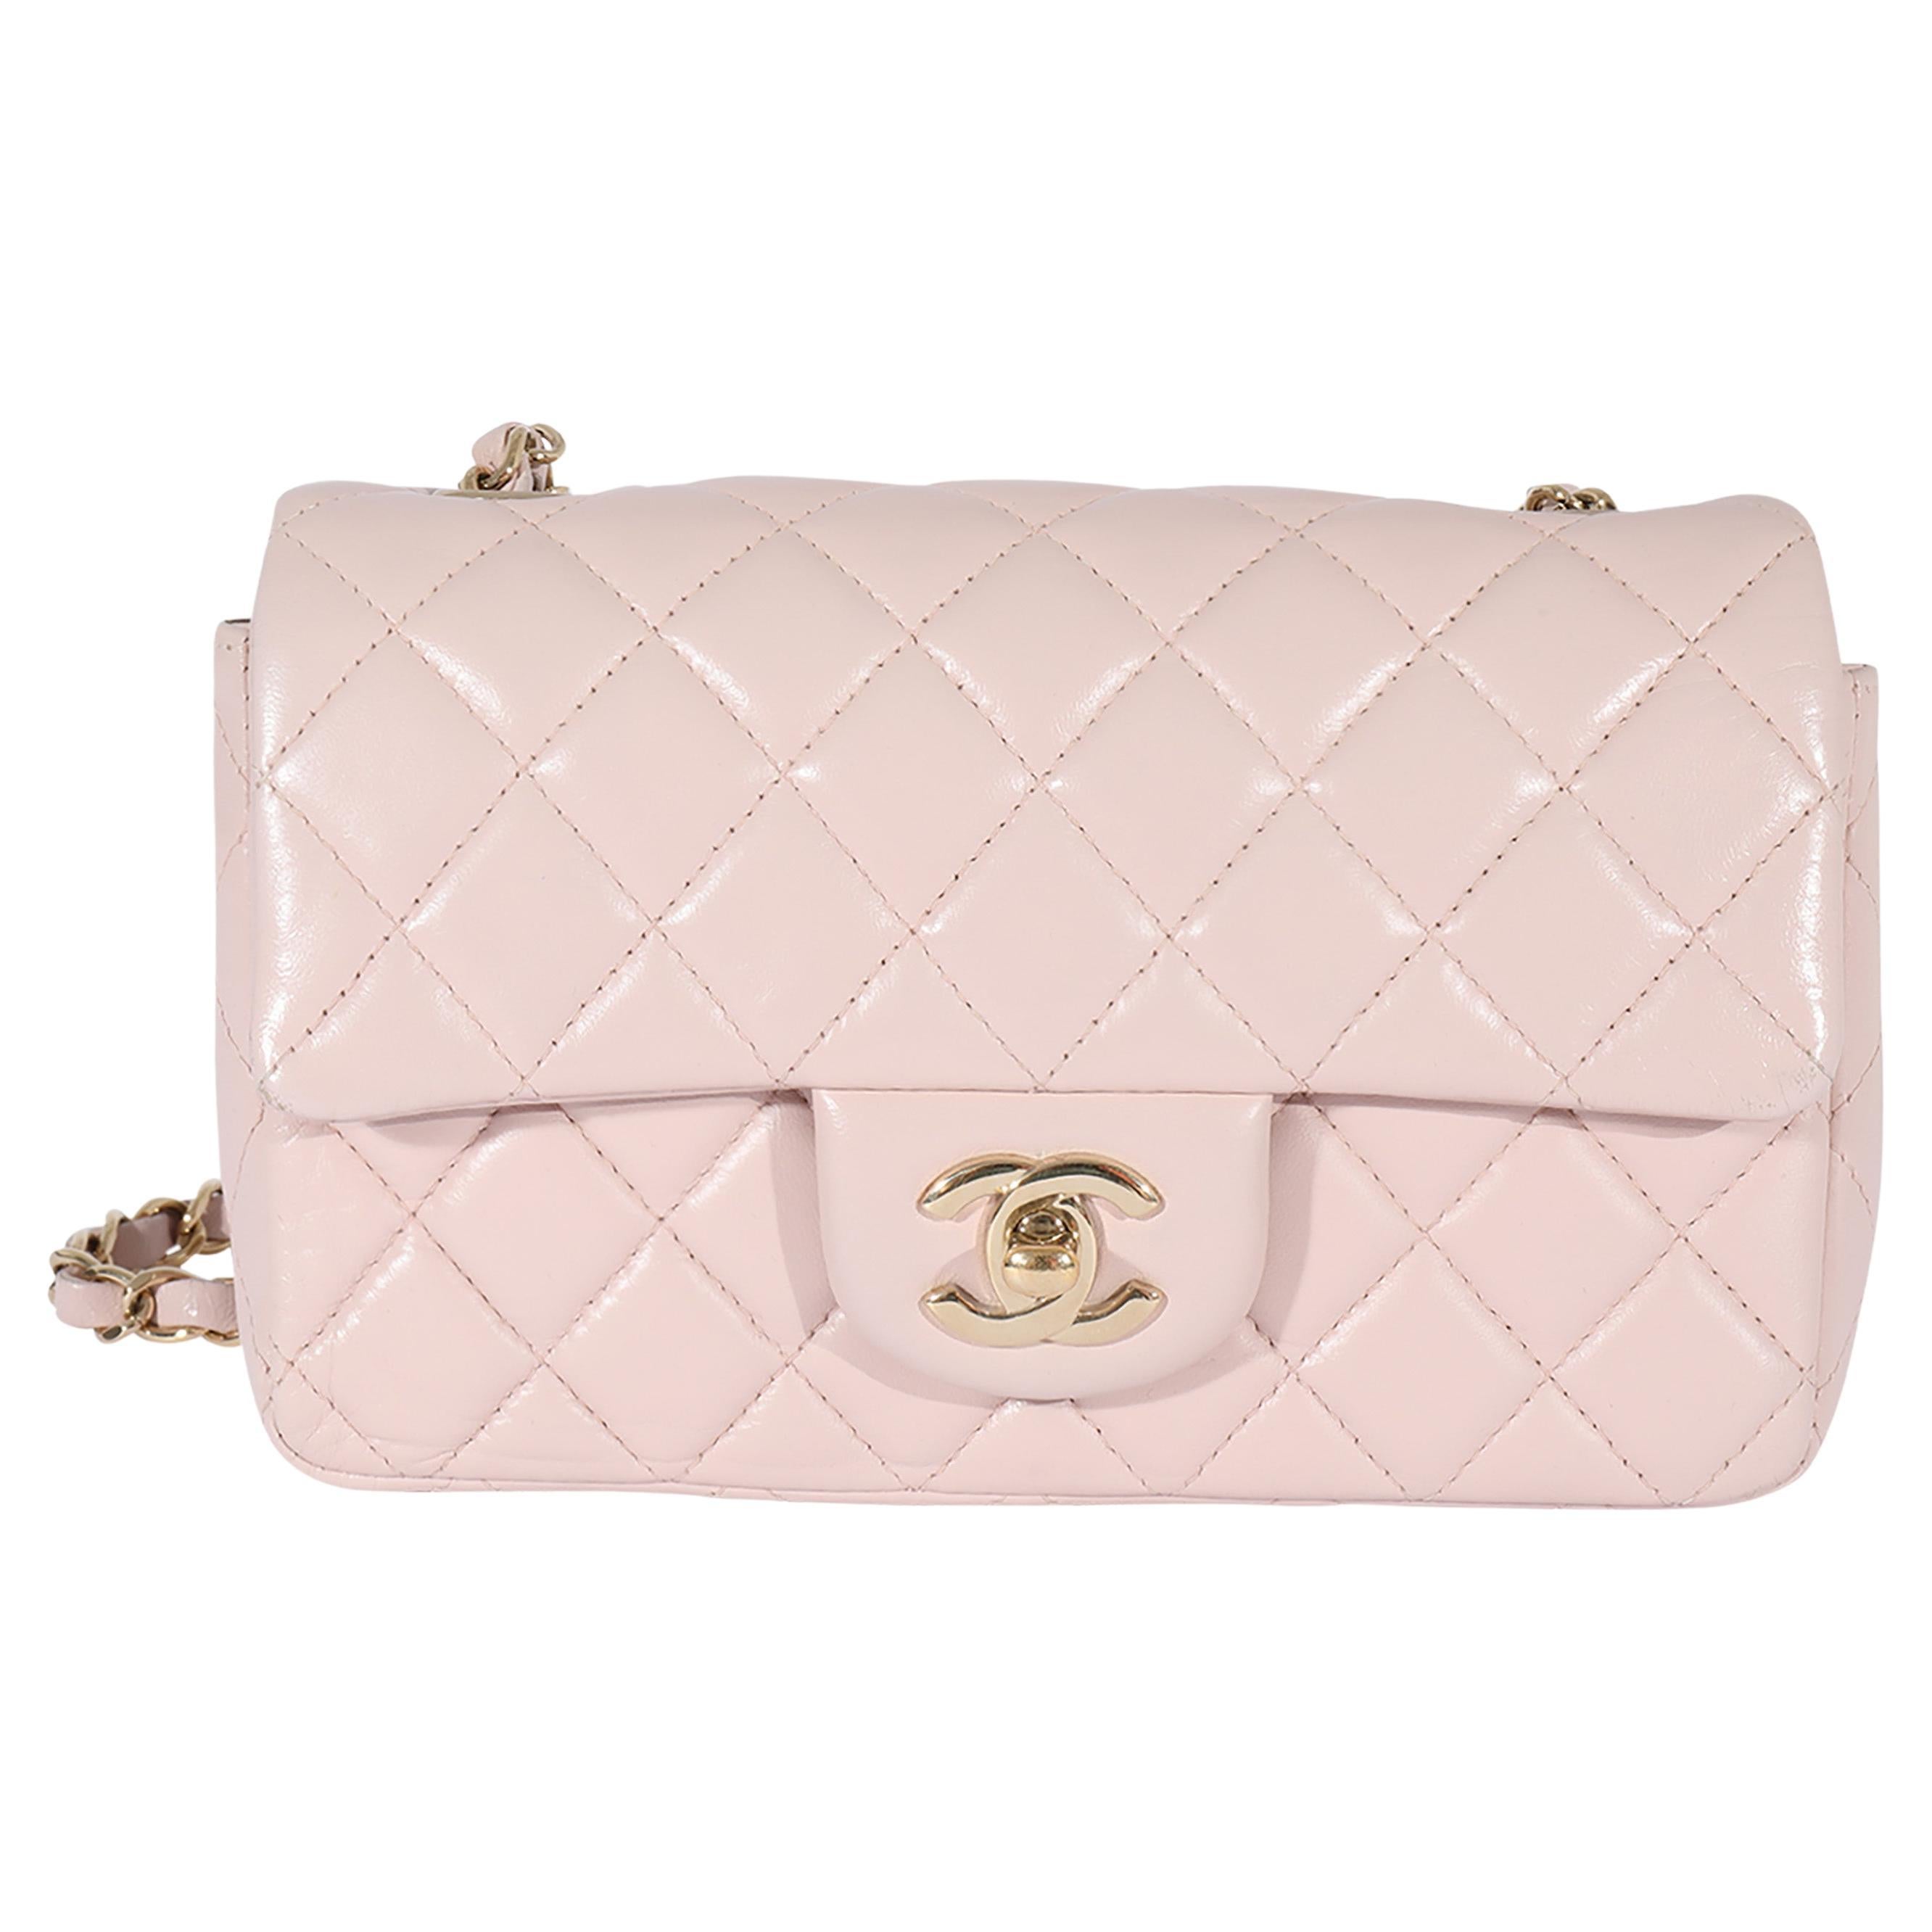 Chanel Light Pink Quilted Lambskin Leather Classic New Mini Flap